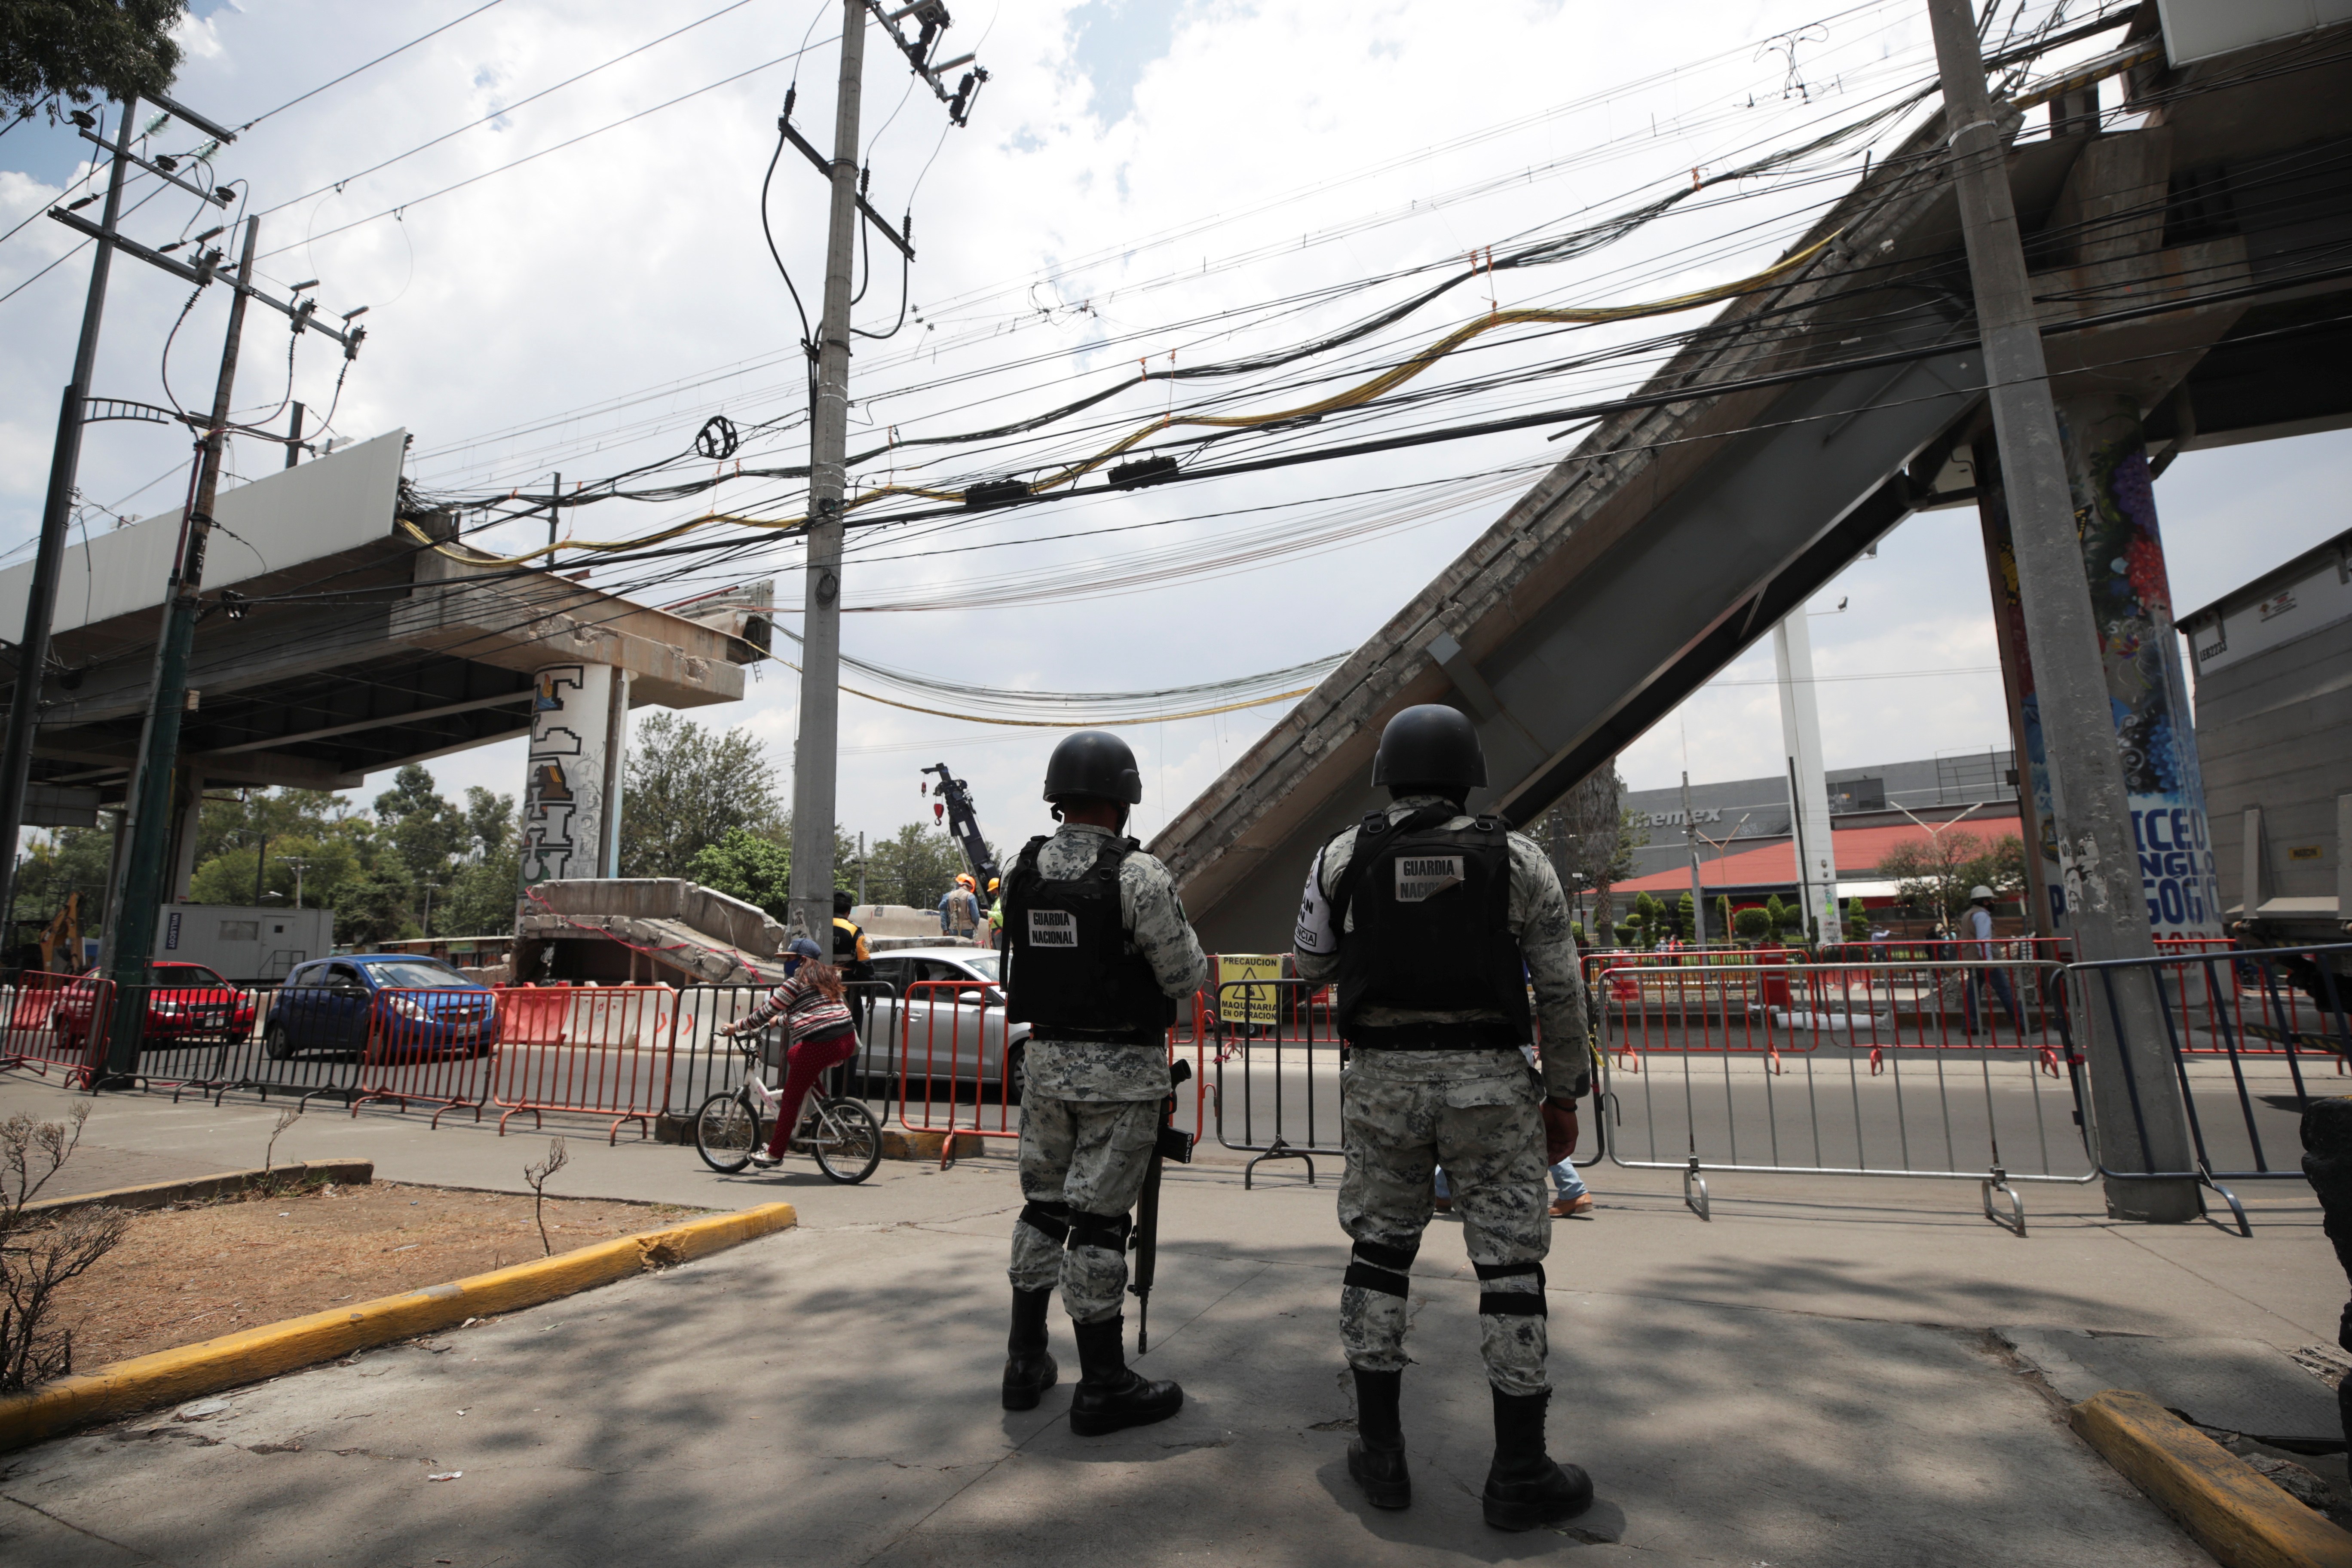 Members of the National Guard stand guard in front of the site where an overpass for a metro partially collapsed with train cars on it, in Mexico City, Mexico May 19, 2021. REUTERS/ Henry Romero